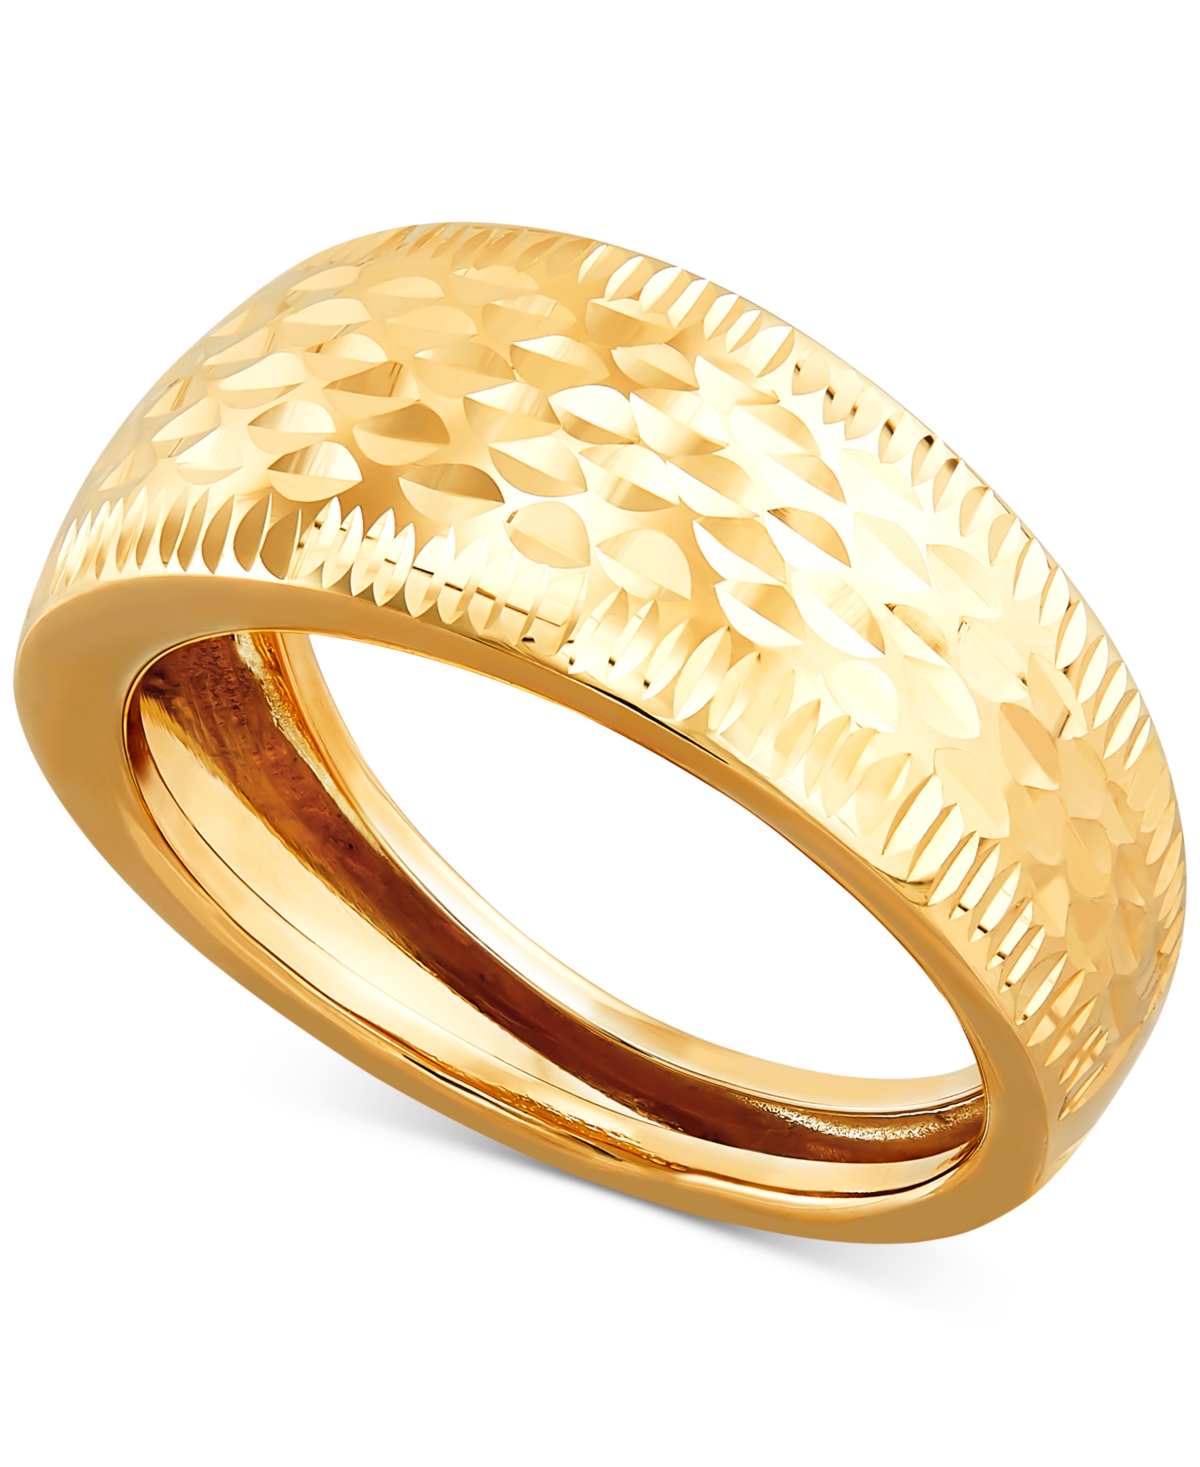 Polished Diamond Cut Dome Ring in 10K Yellow Gold - Yellow Gold